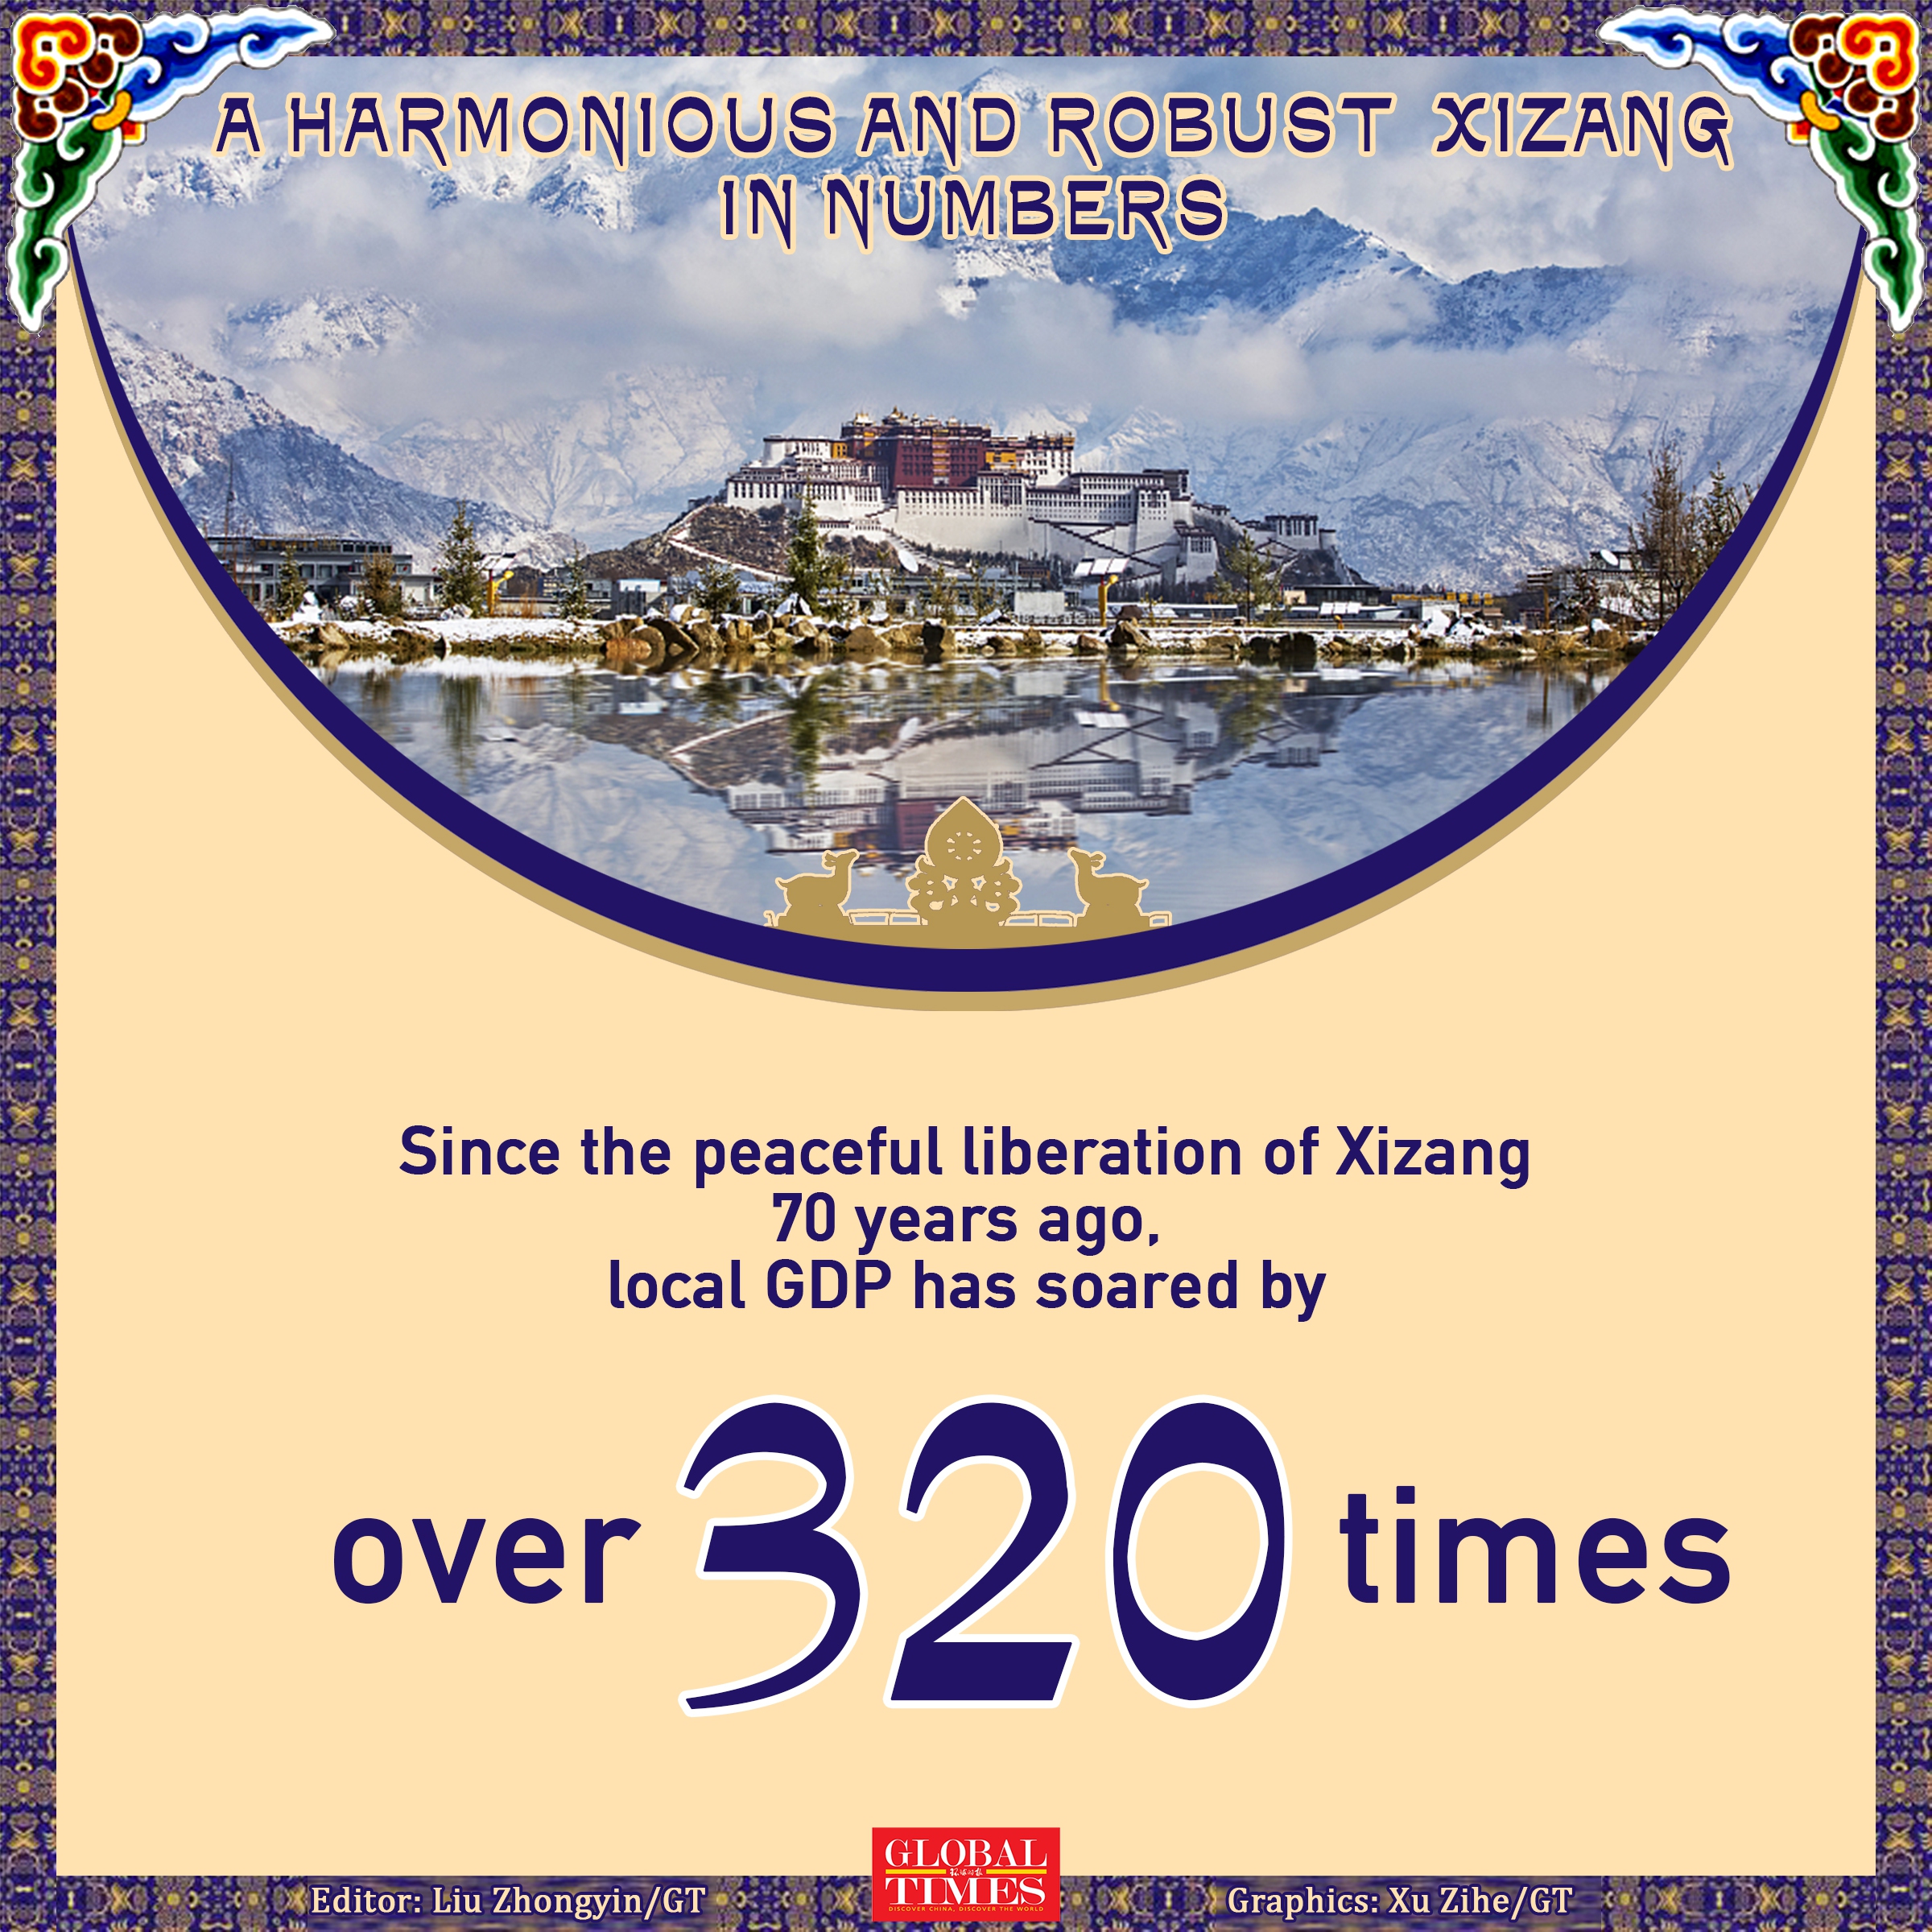 A harmonious and robust Xizang in numbers Graphic: Xu Zihe/GT